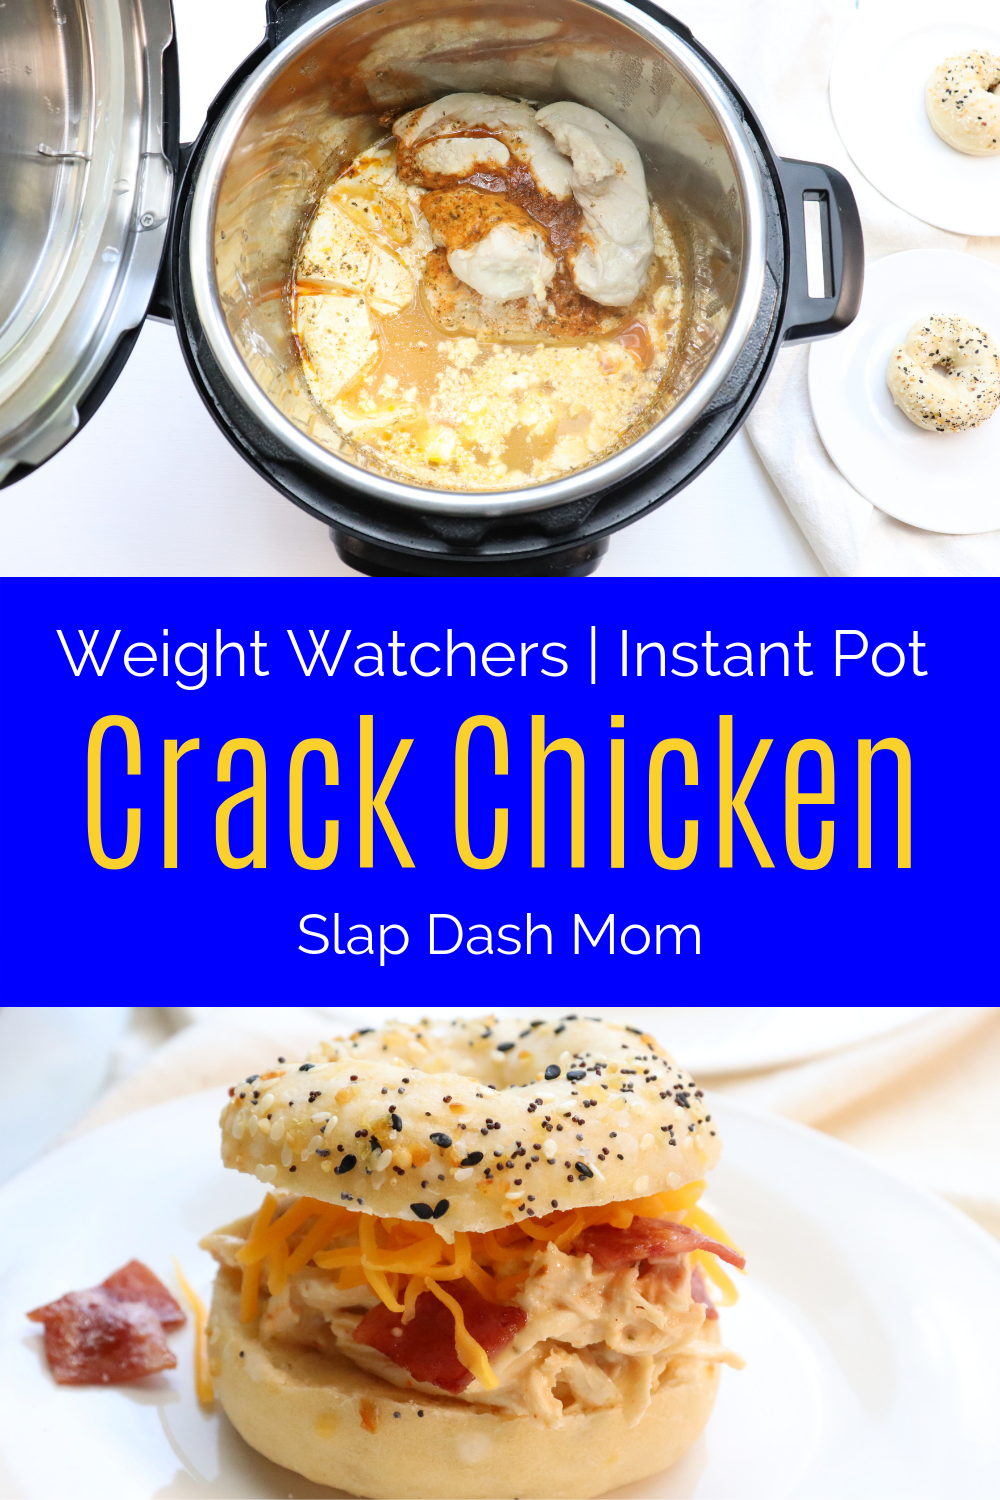 How to Make Instant Pot Crack Chicken